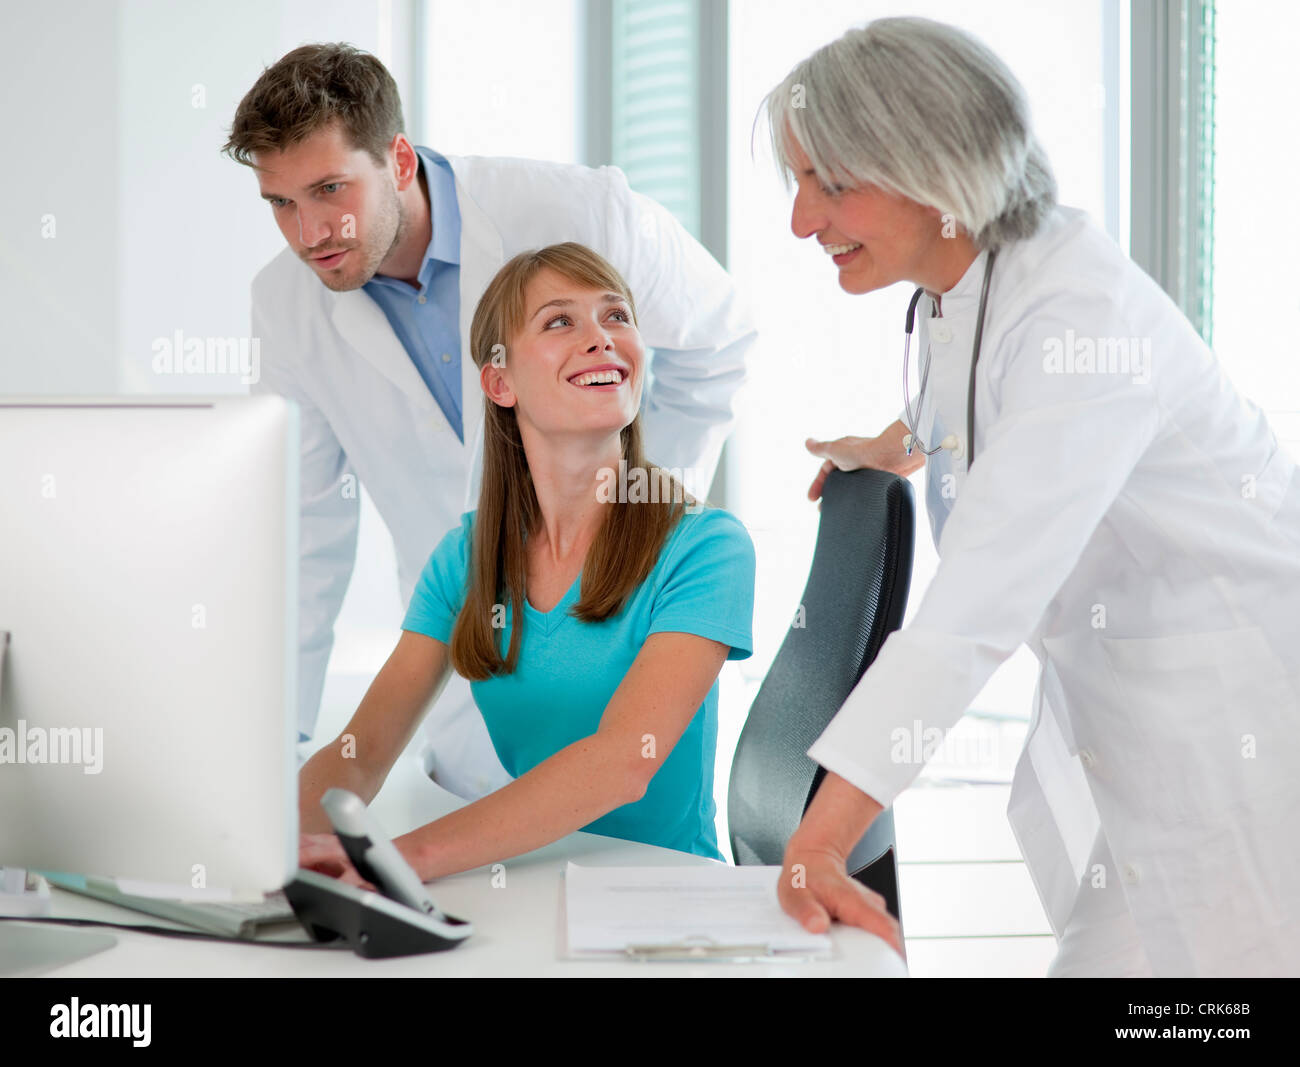 Medical Receptionist Computer High Resolution Stock ...